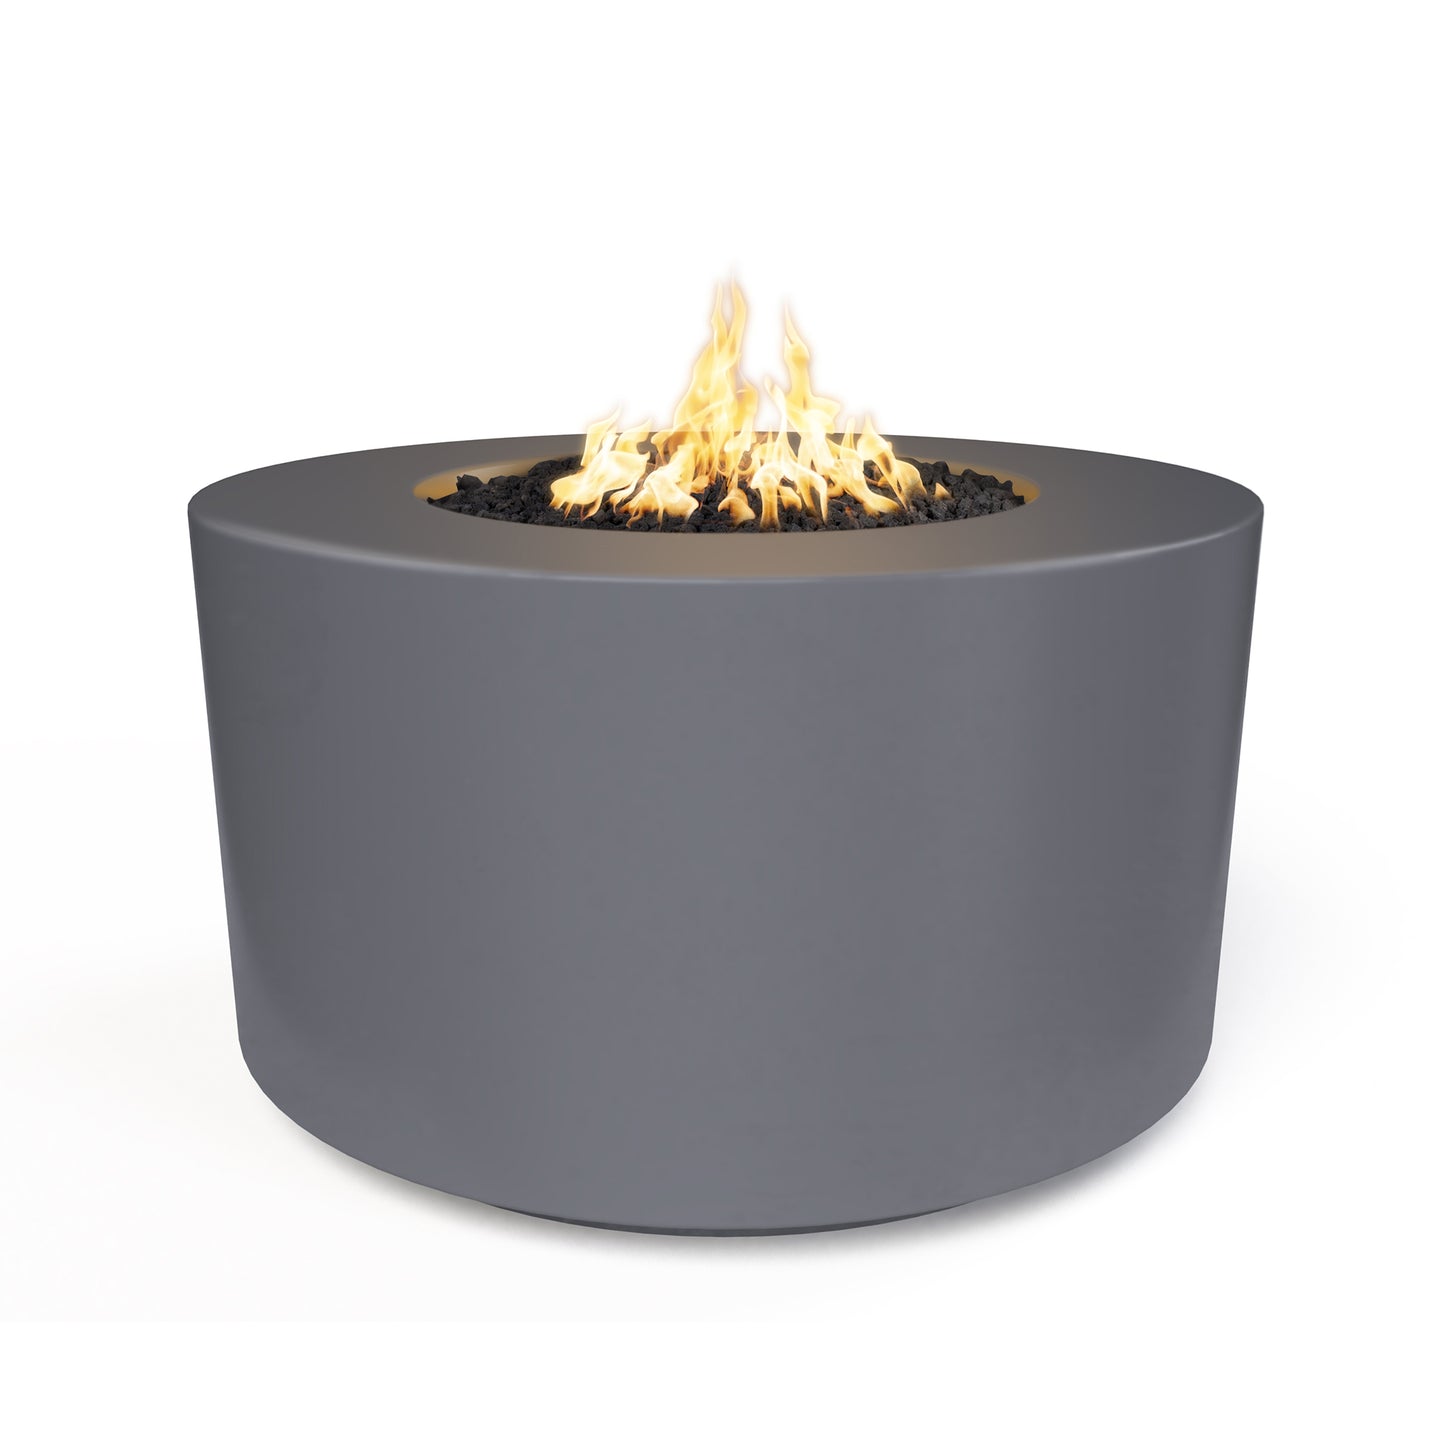 Florence Concrete Fire Pit 42" - 24" Tall - Electronic Ignition